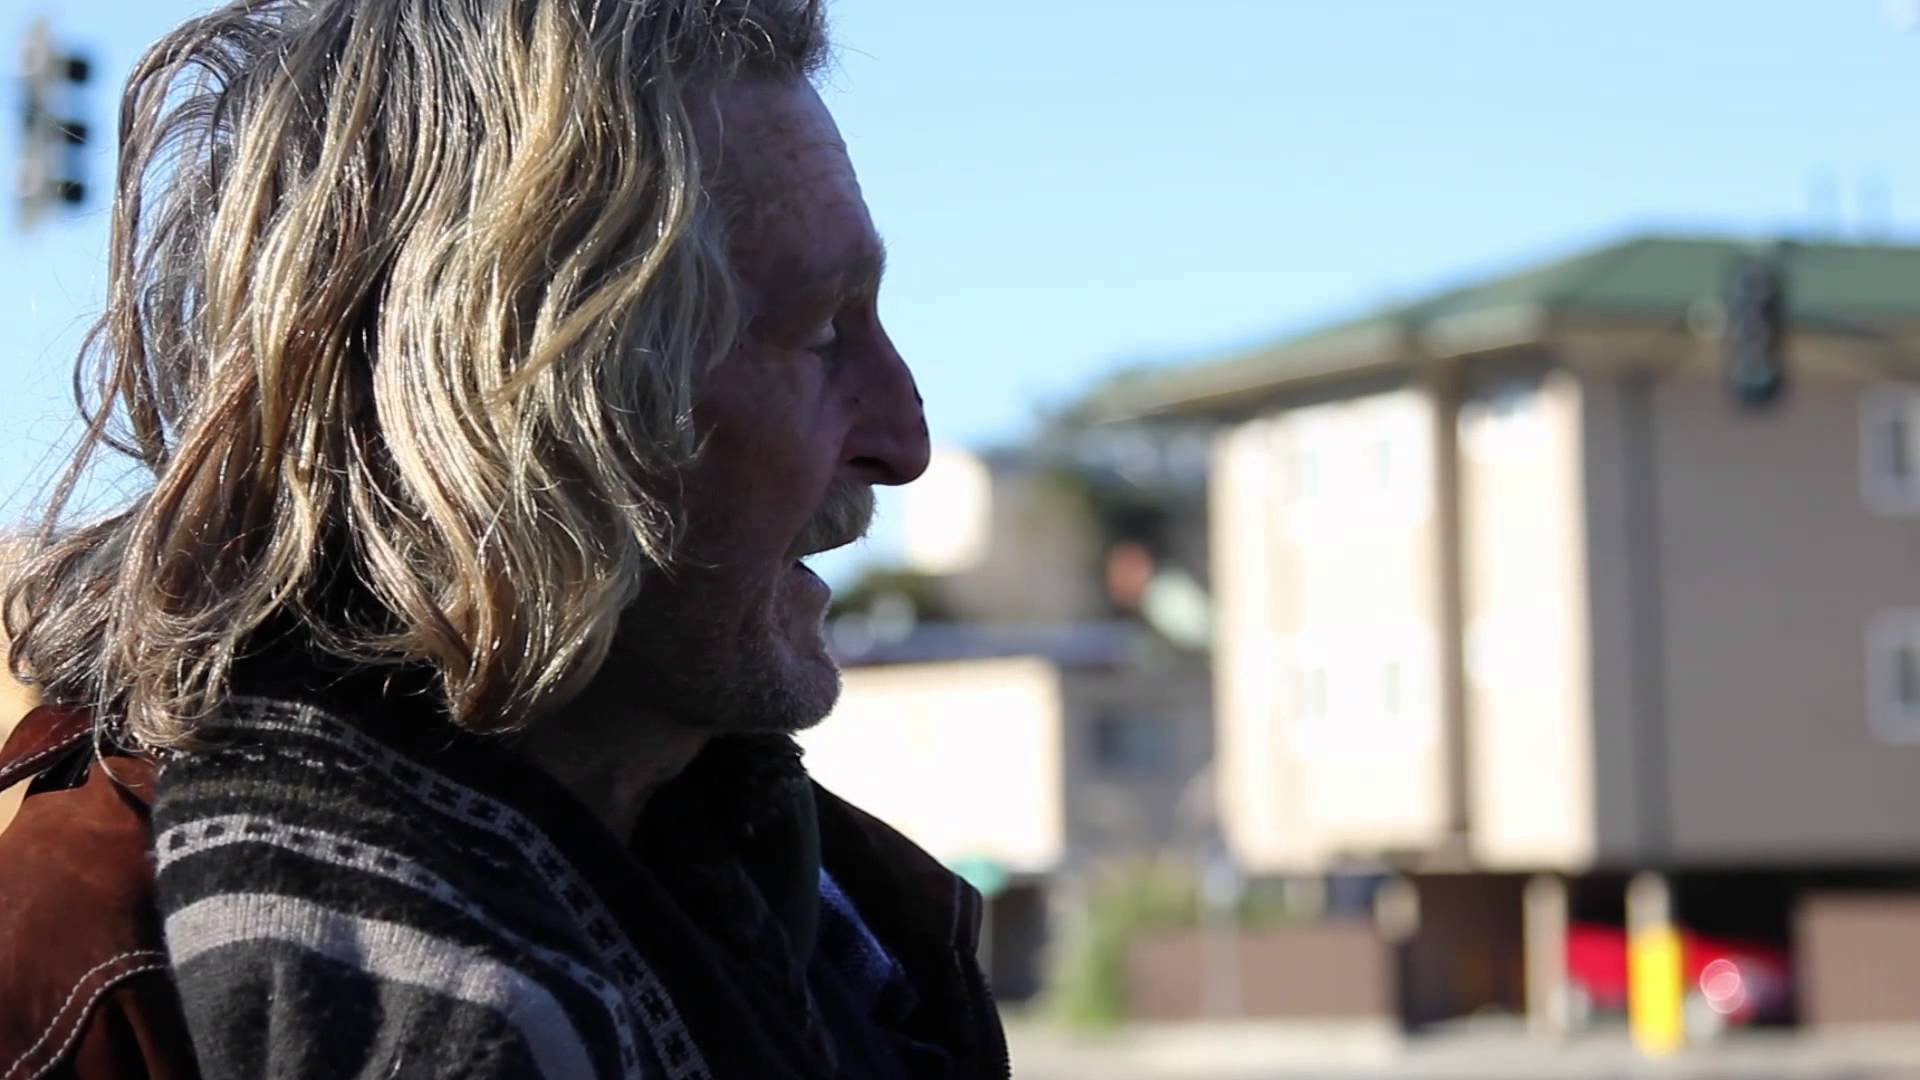 Meet Mark, one of the over 8,000 homeless people in Oakland, CA